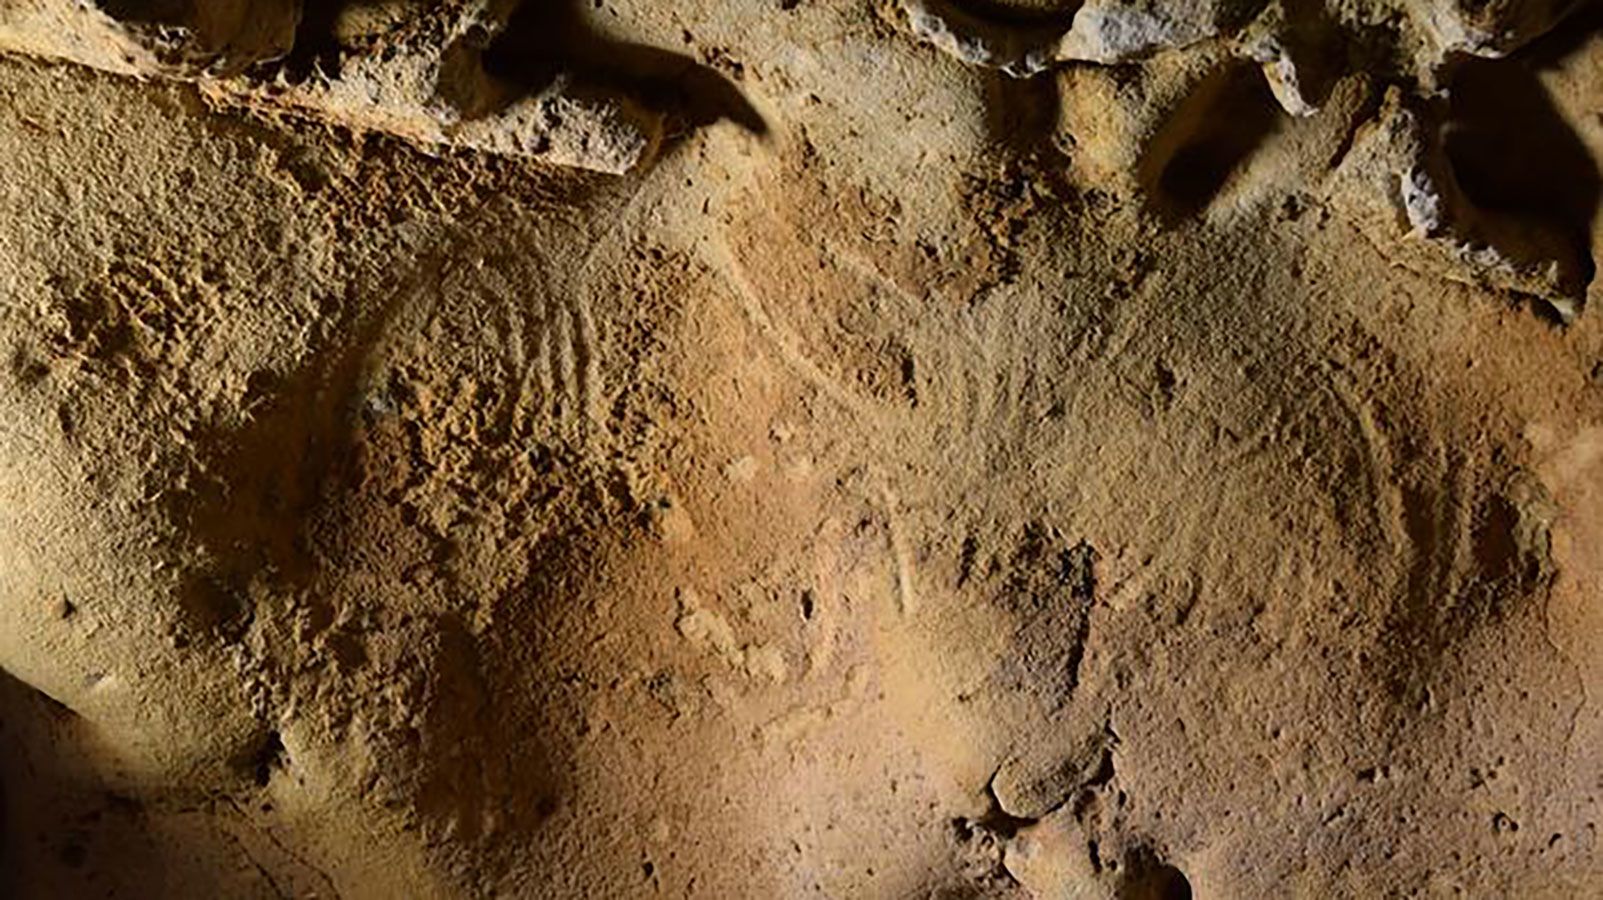 Neanderthals created Europe's oldest 'intentional' engravings up to 75,000 years ago, study suggests 2